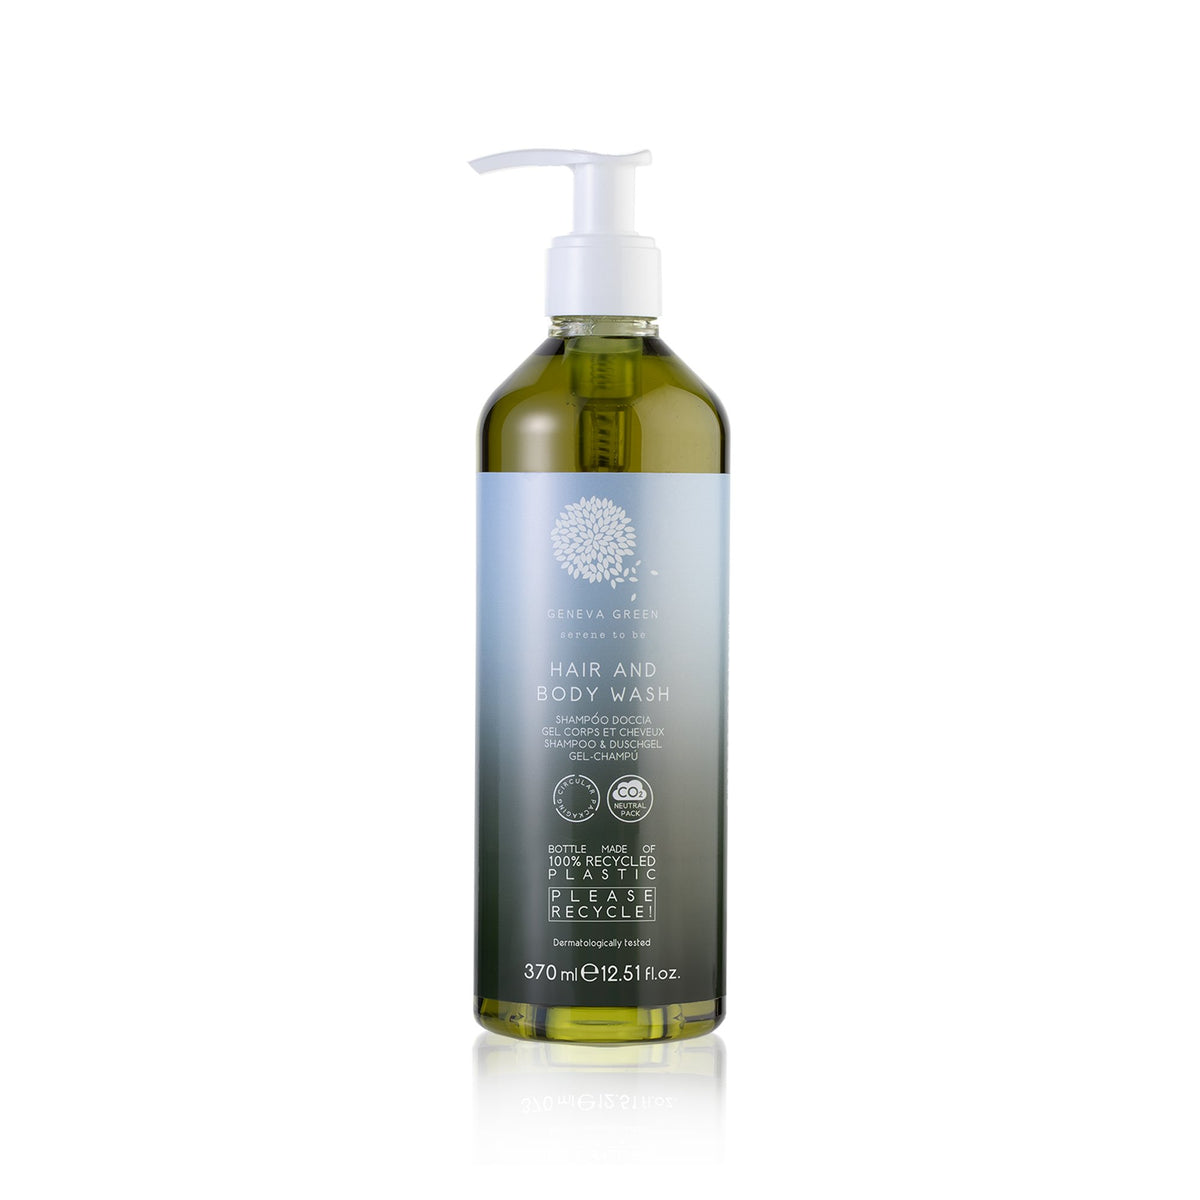 Geneva Green Hair And Body Wash With Locked Pump (12.51 Fluid Ounce) 